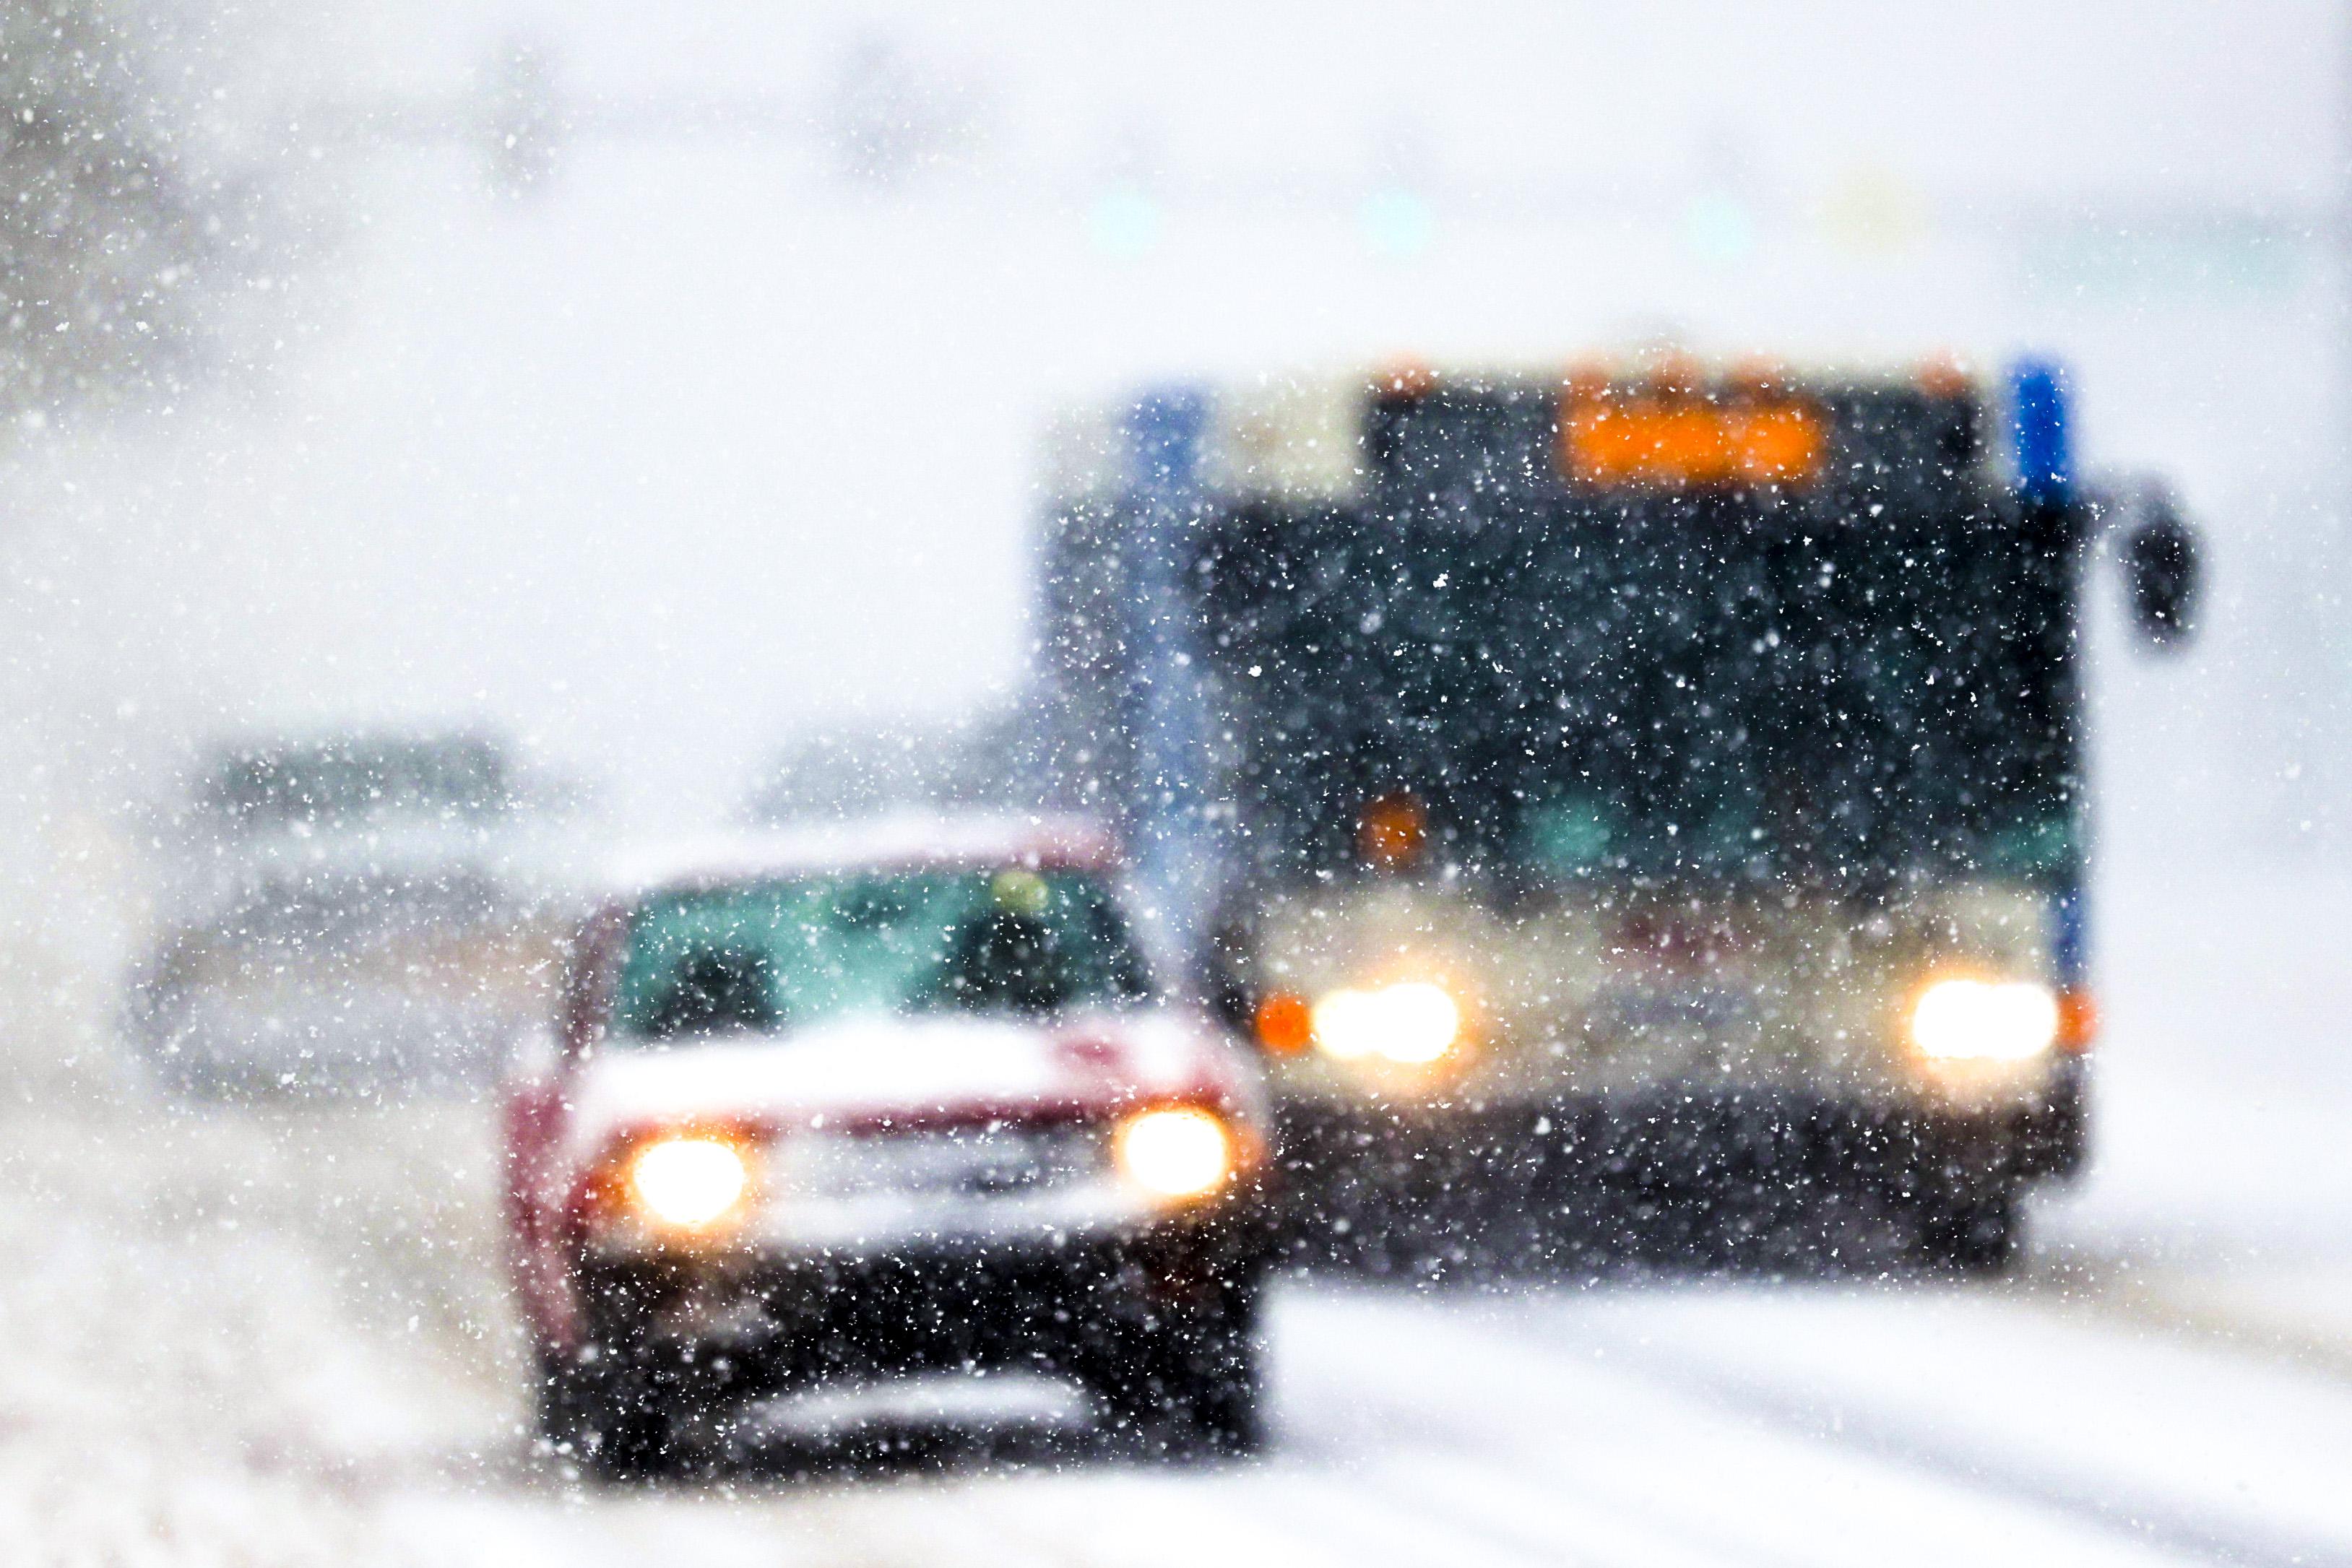 Cars and a bus drive through snow on Colfax Avenue in Denver